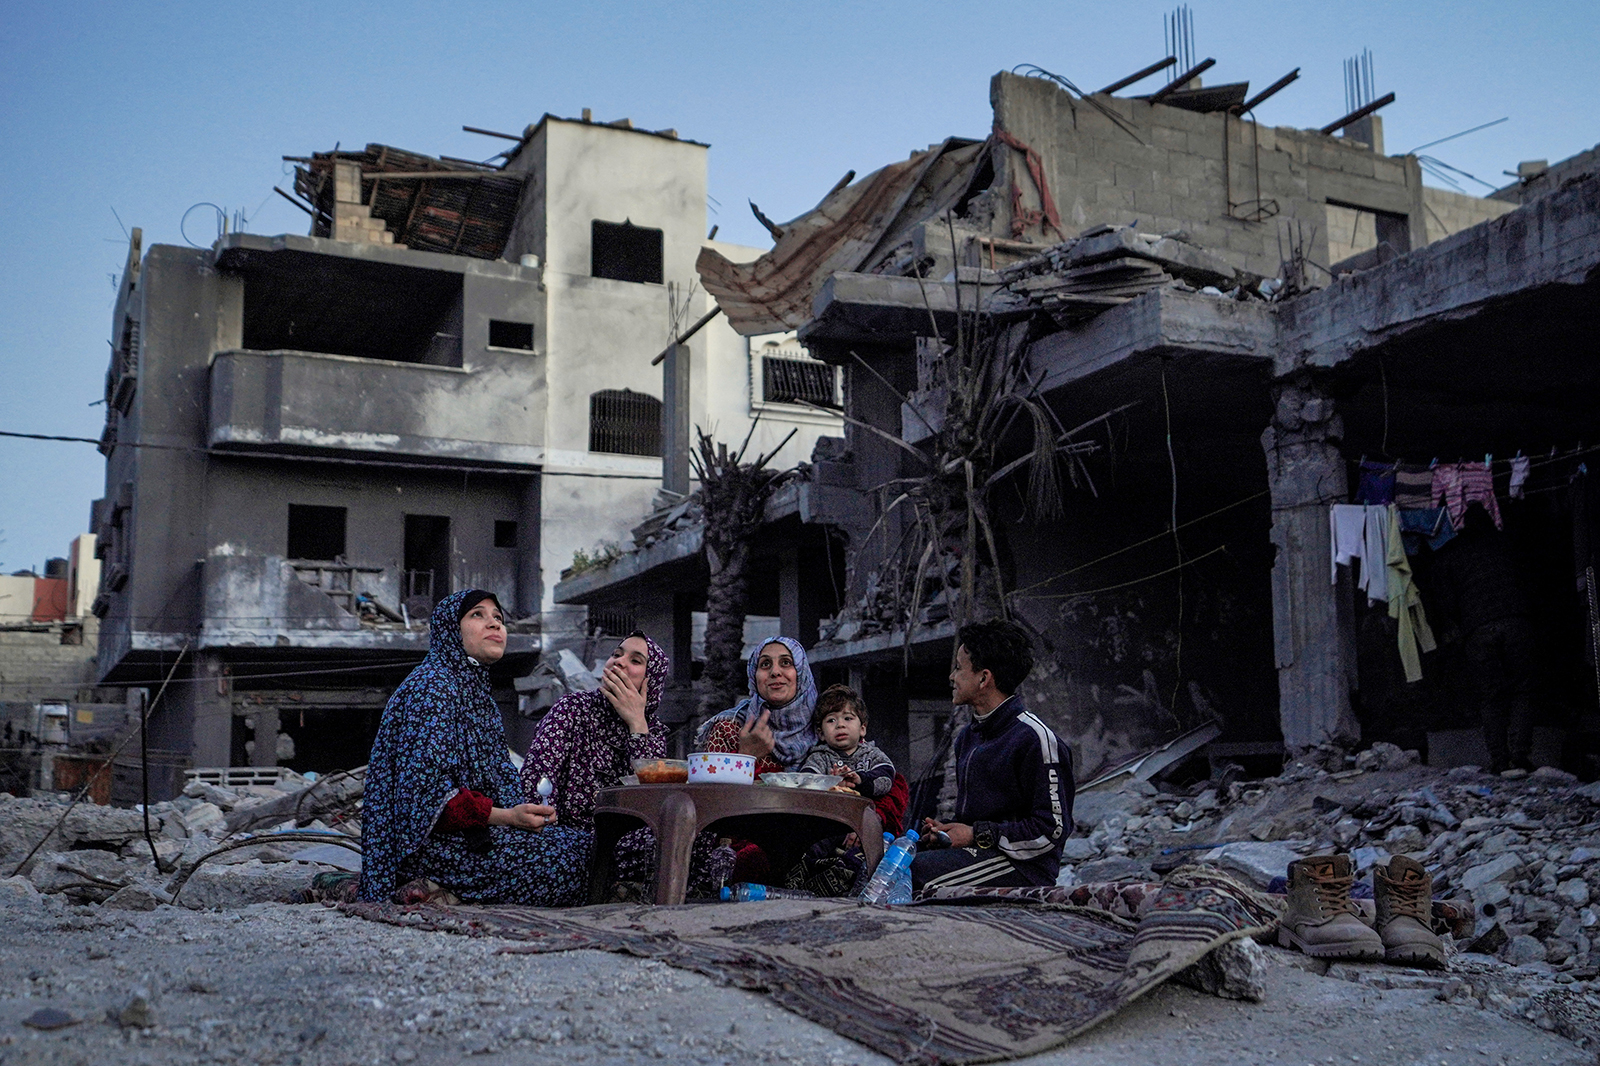 A Palestinian family eats an iftar meal, the breaking of fast, in the ruins of their house in Deir el-Balah, in central Gaza, on March 11.